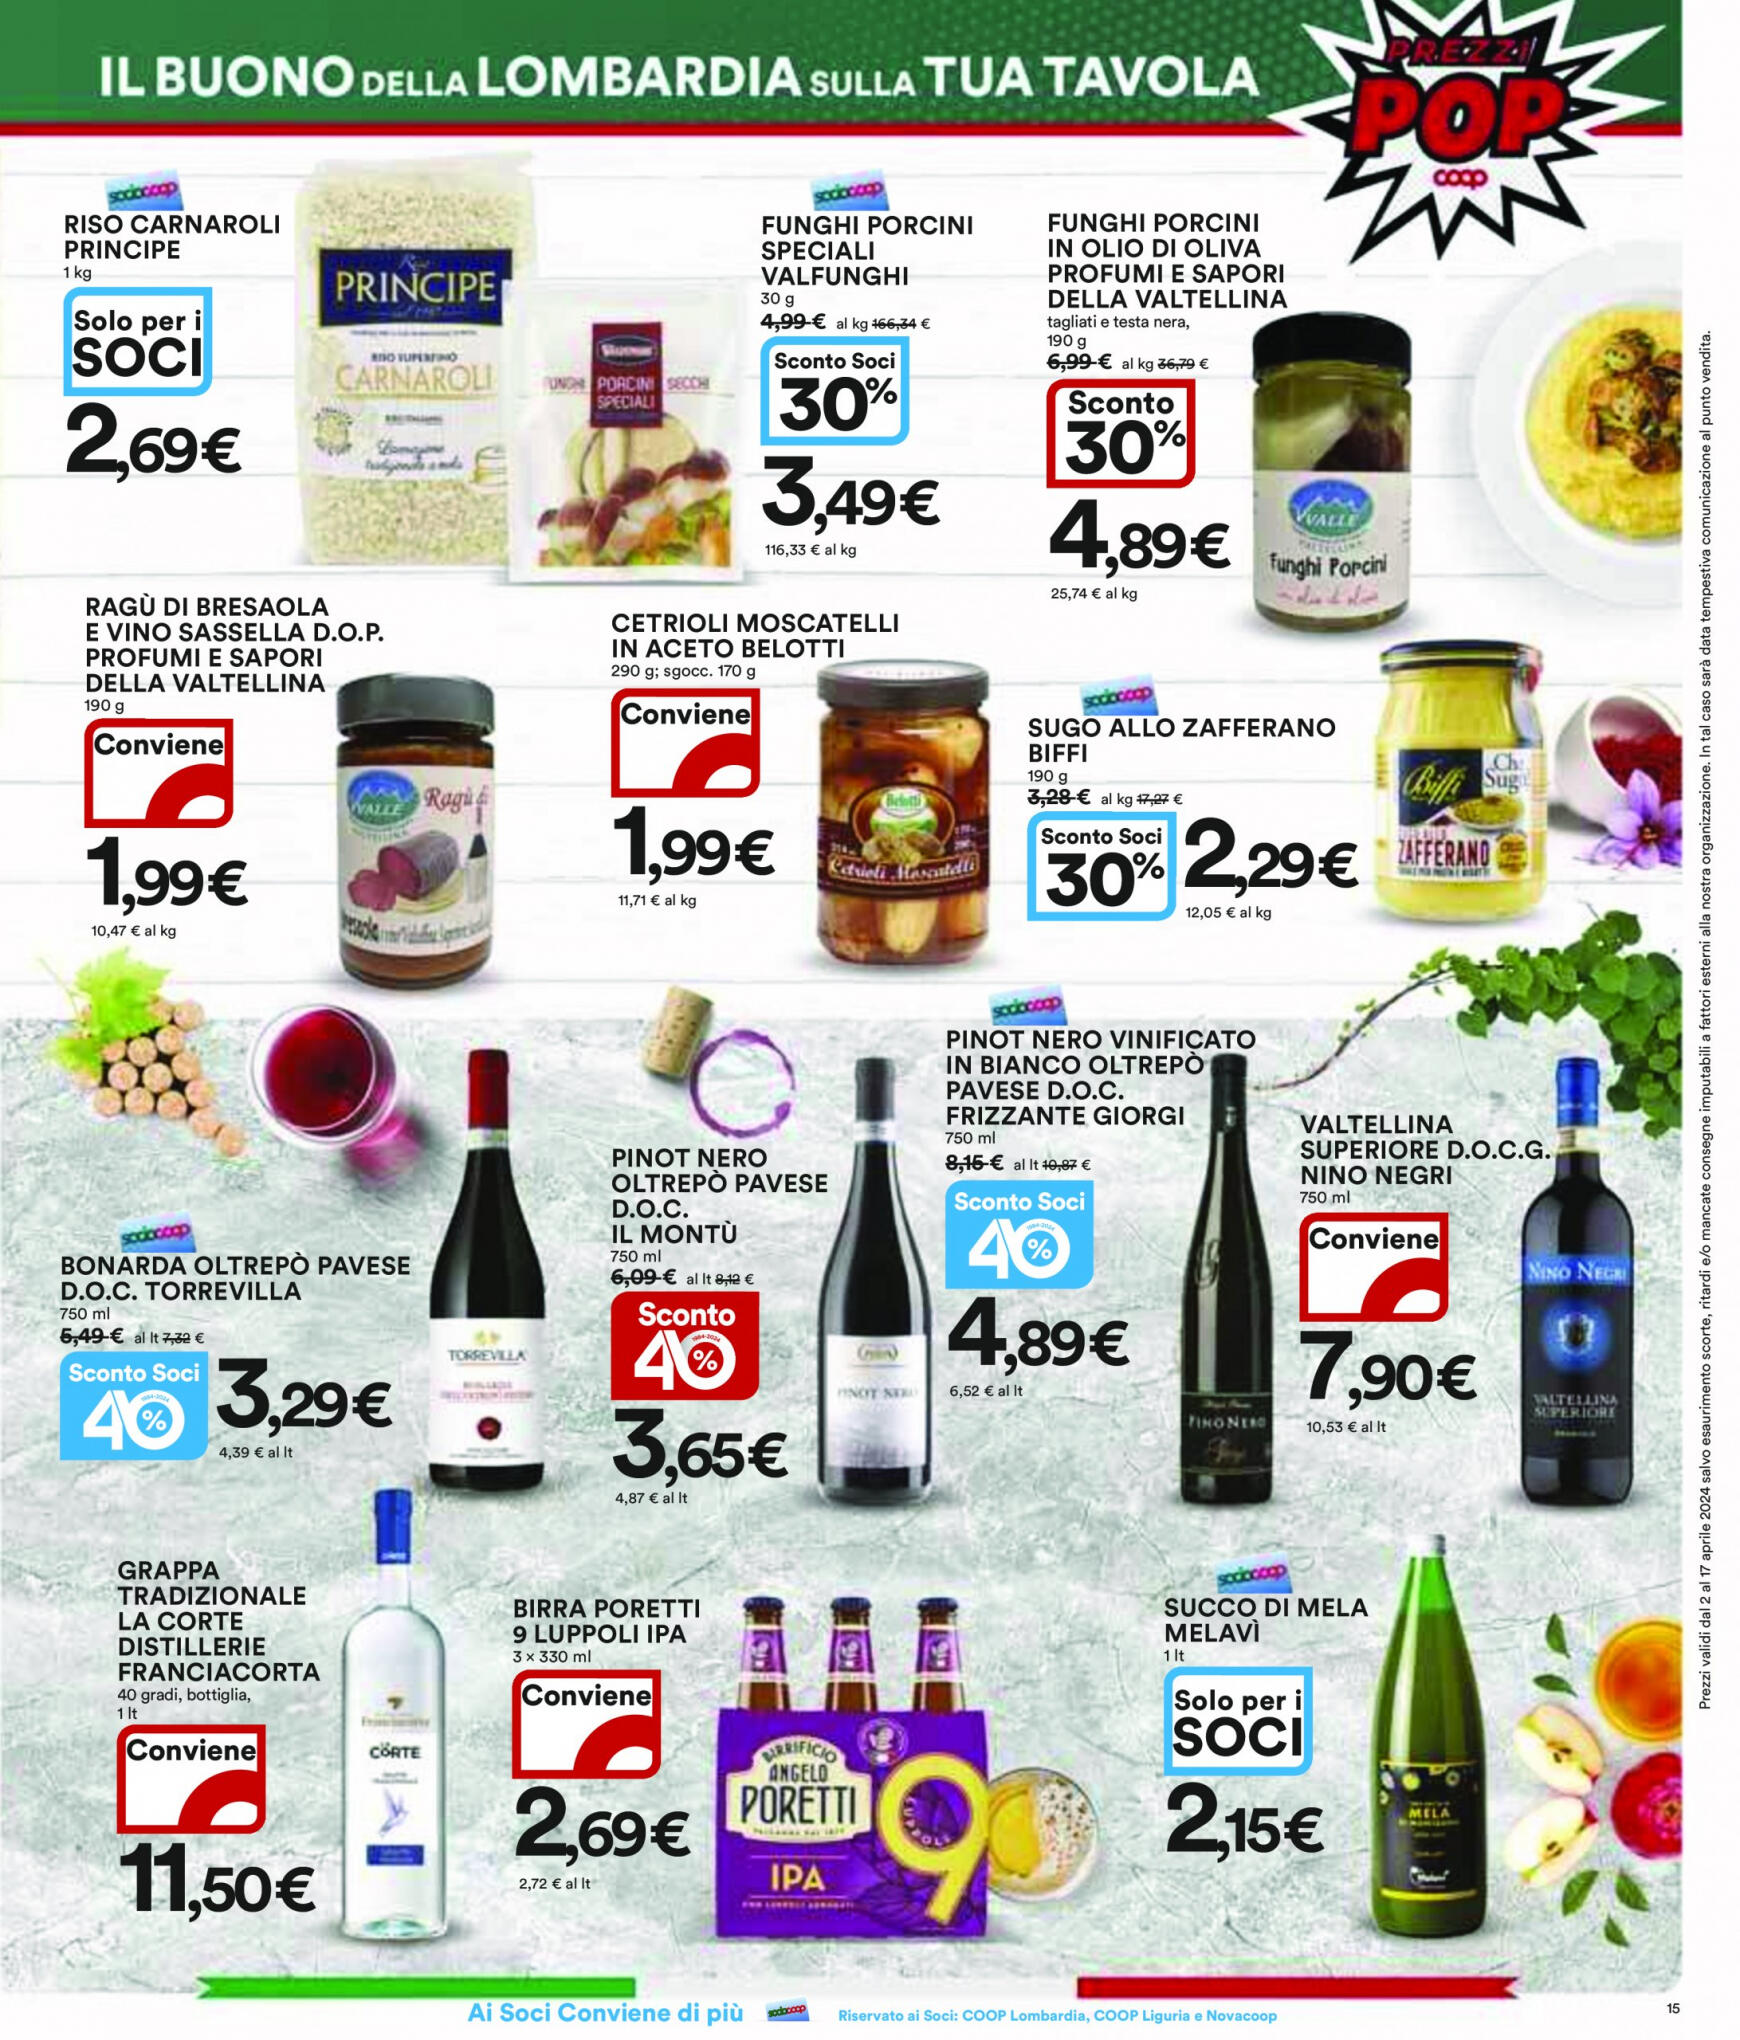 coop - Nuovo volantino Coop 02.04. - 17.04. - page: 15